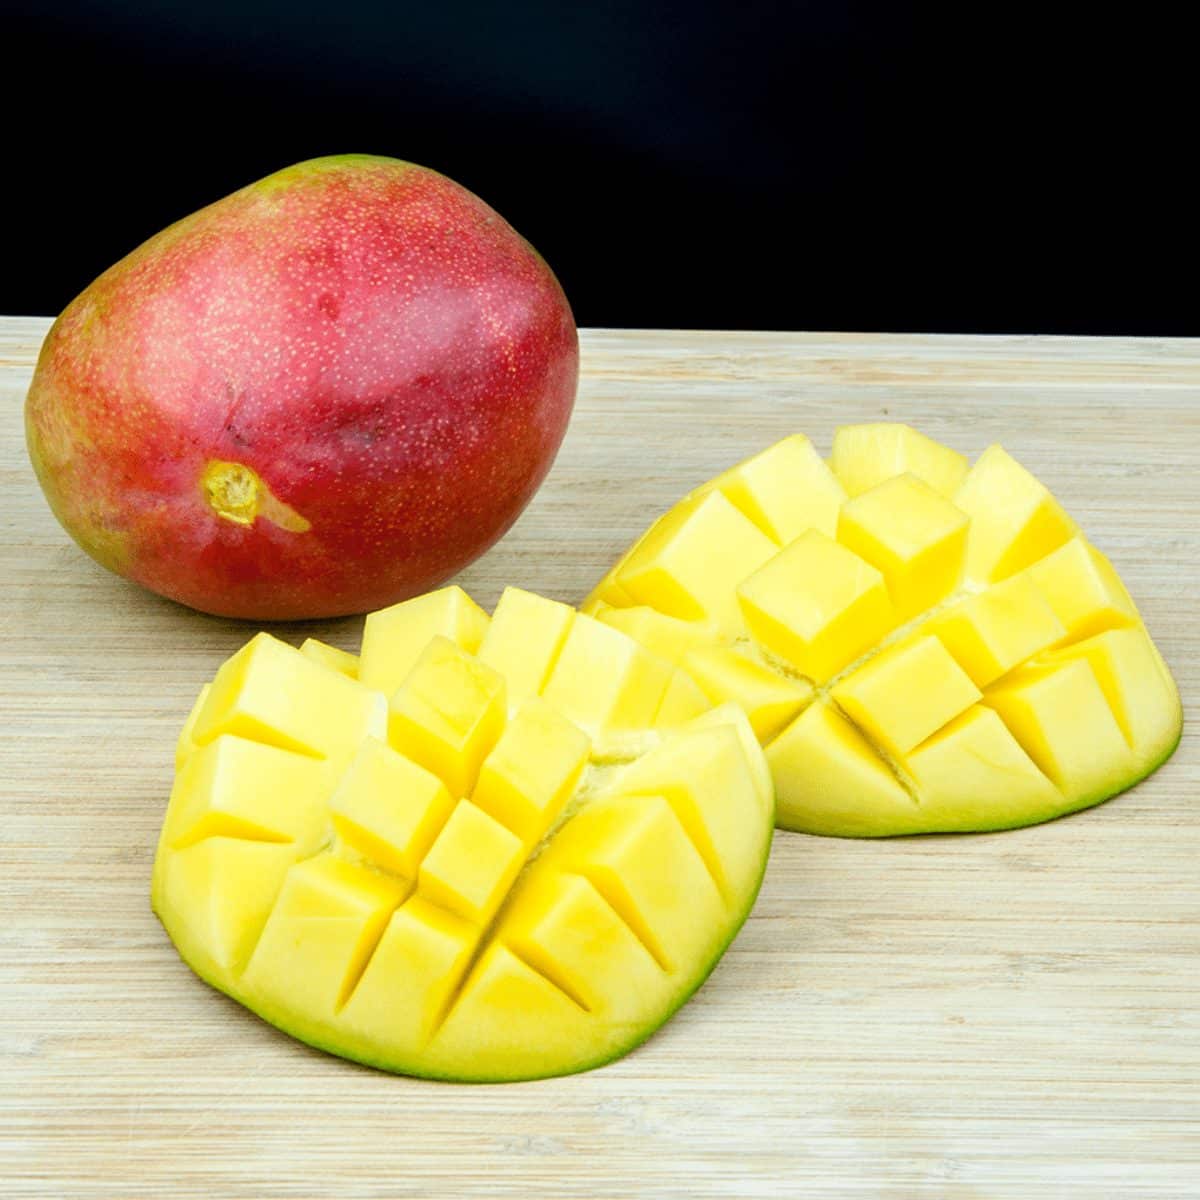 Ever wondered how to prepare a mango like in those wonderful tropical fruit displays you see at fancy buffets? It's easy. Just follow this simple tutorial... | theyumyumclub.com